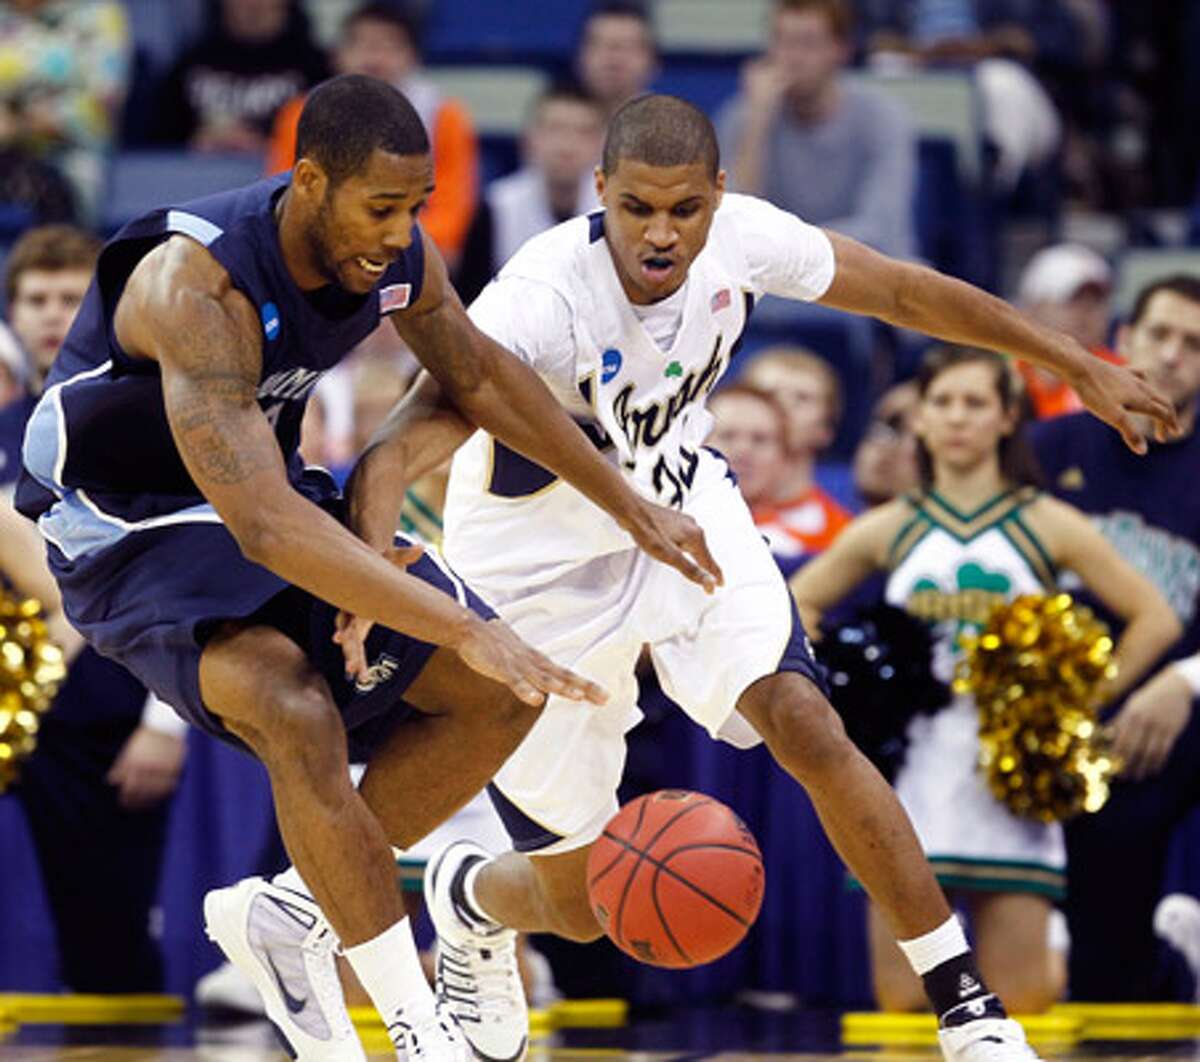 Notre Dame's Carleton Scott (right), a 6-foot-8 forward from Madison, averaged 5.0 points and 4.6 rebounds last season.